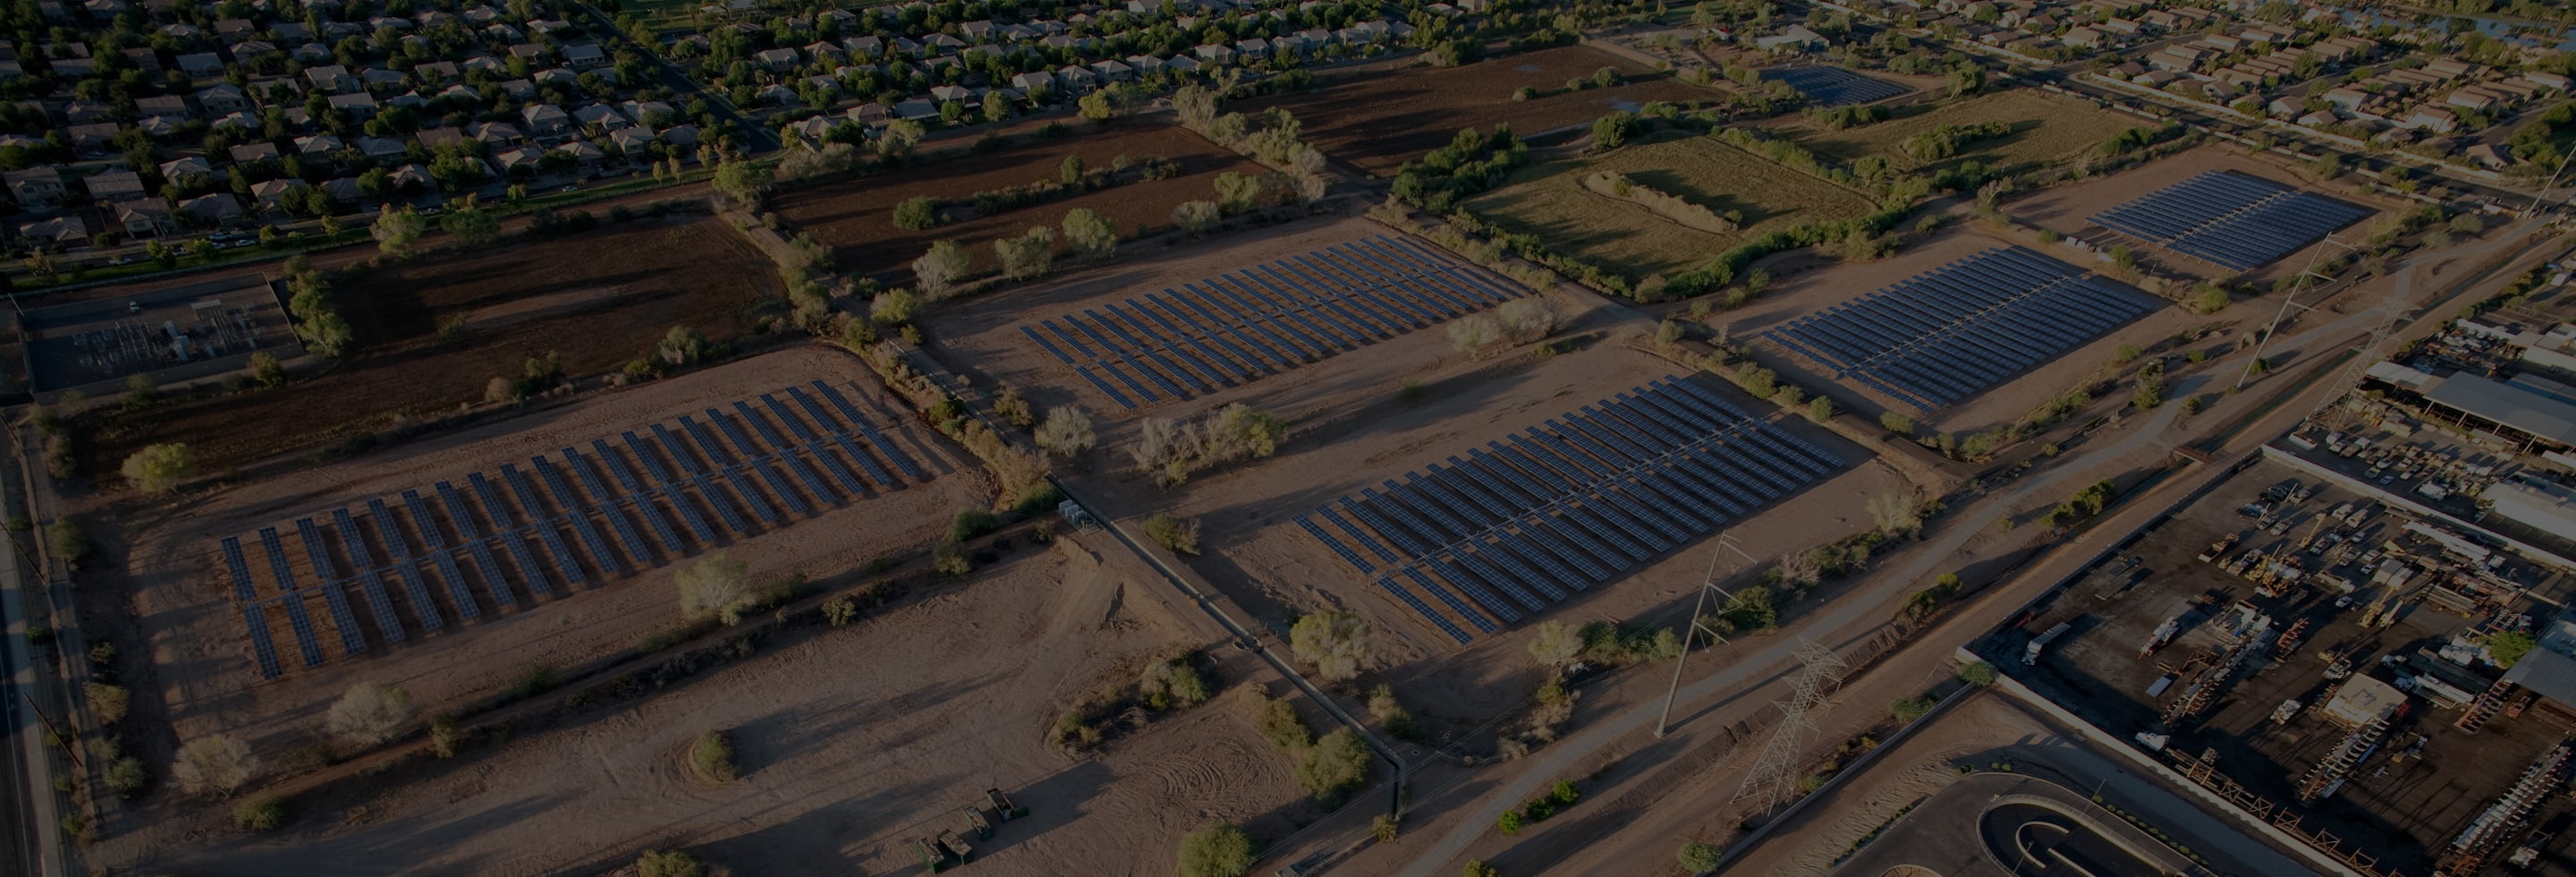 Birdseye view of several solar fields with rows of blue panels surrounded by farmland and equipment.